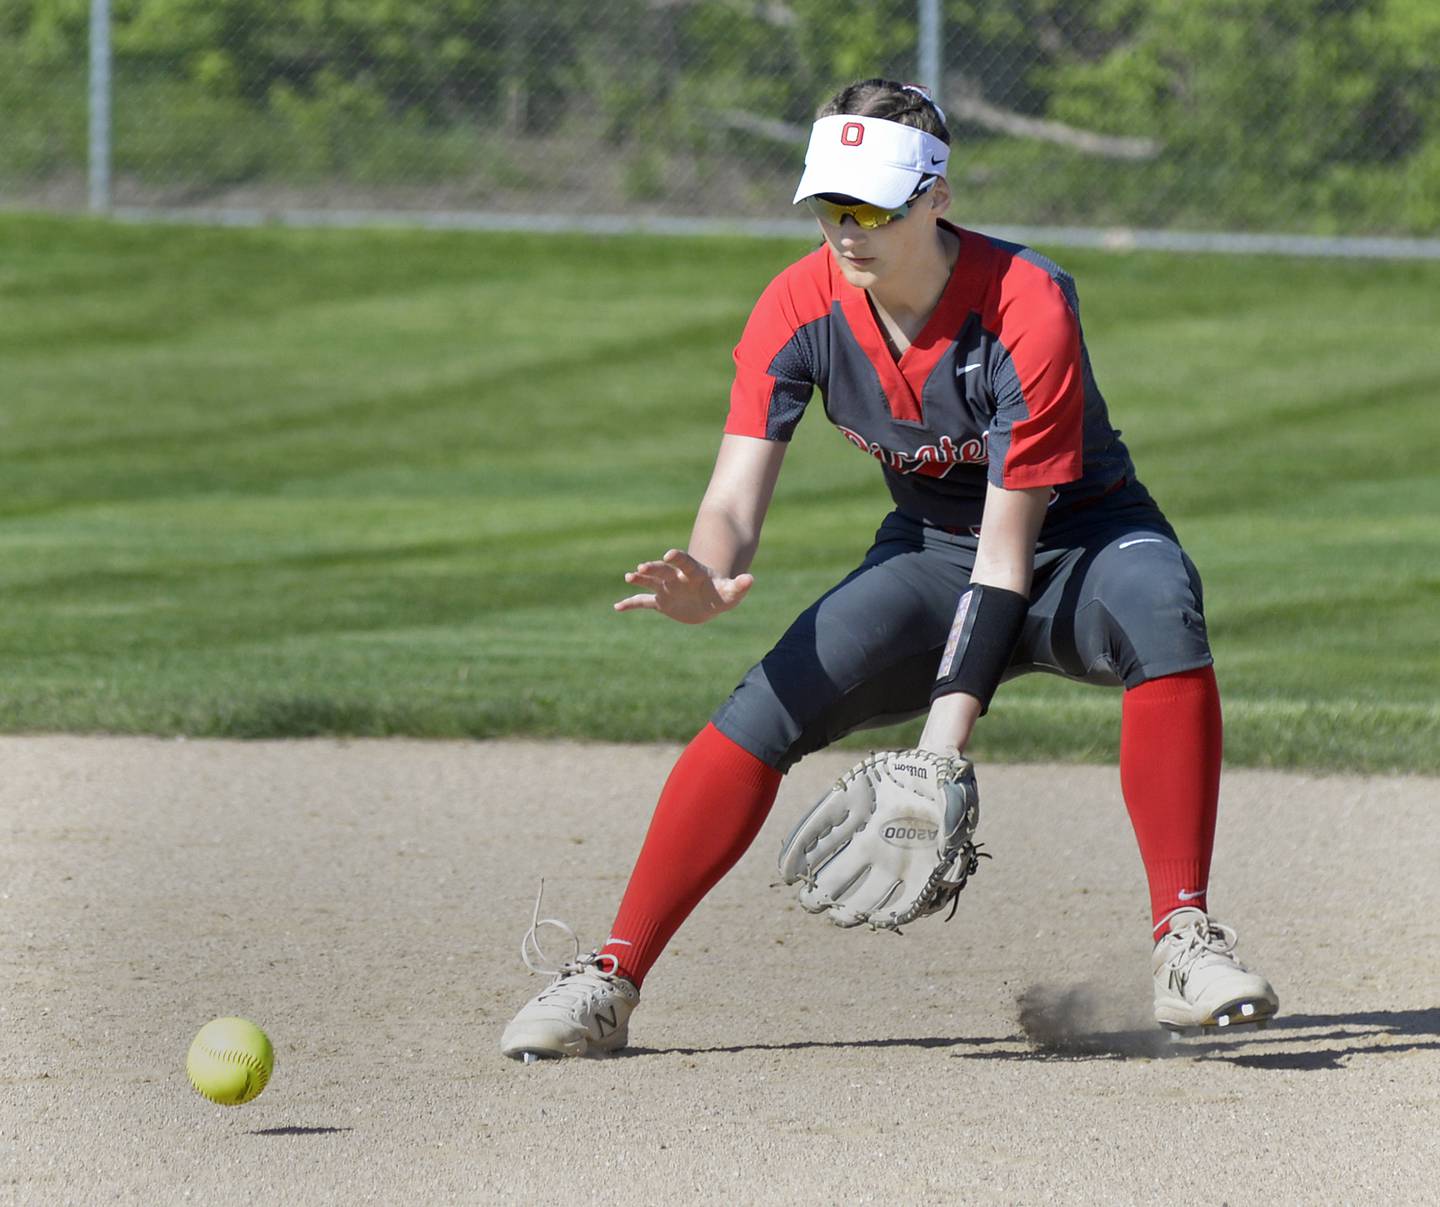 Ottawa 2nd baseman Hailey Larsen sets to scoop up a ground ball in the 1st inning Wednesday against Rochelle at Ottawa.